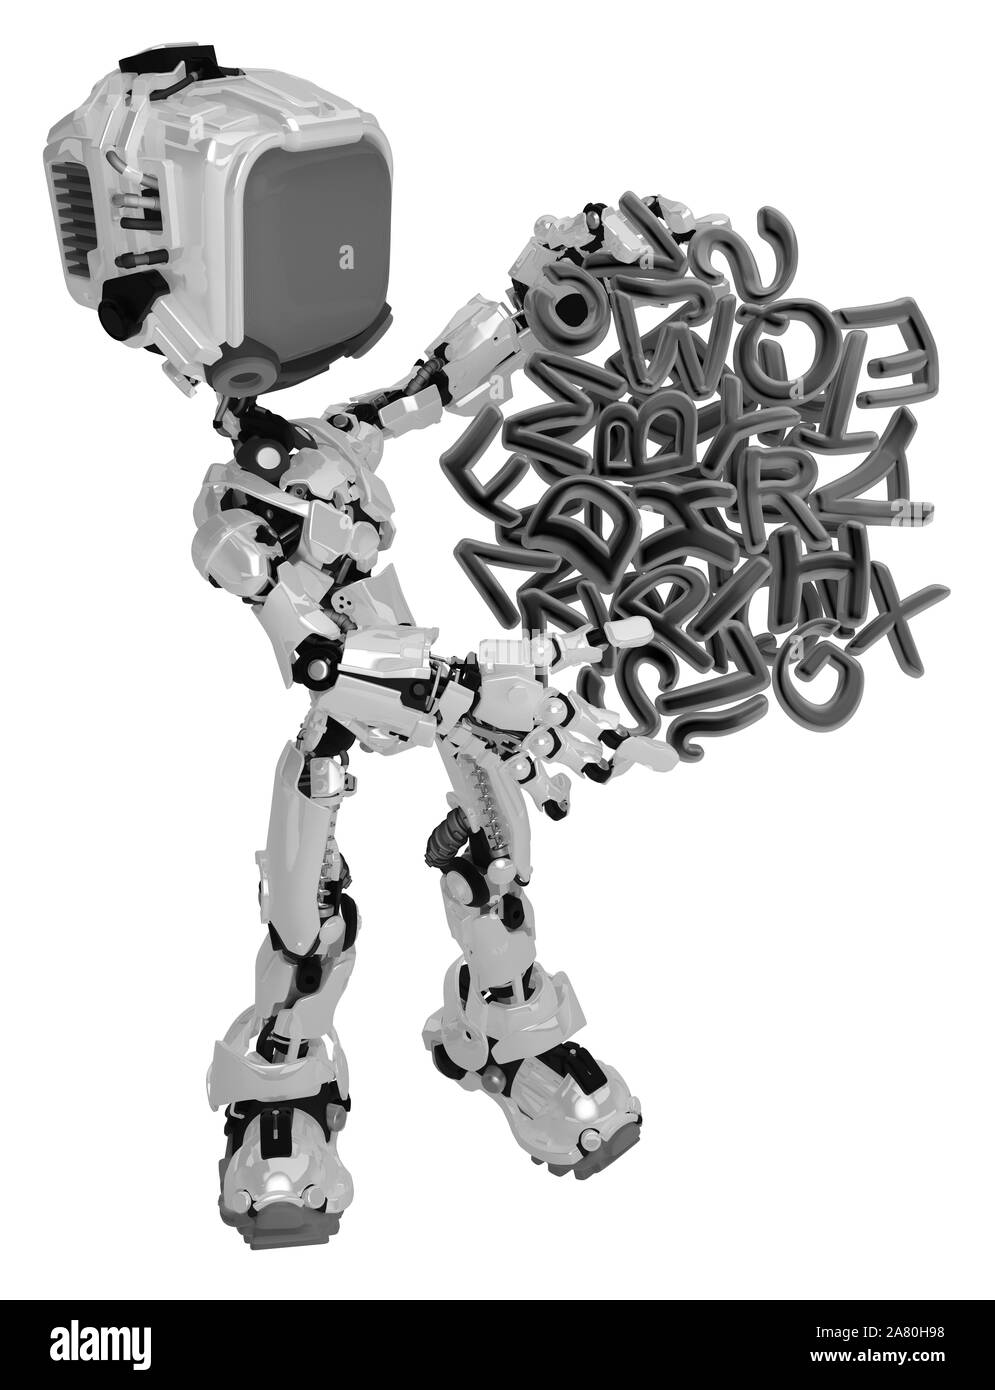 Screen robot figure character pose with text jumble, 3d illustration, horizontal, isolated Stock Photo